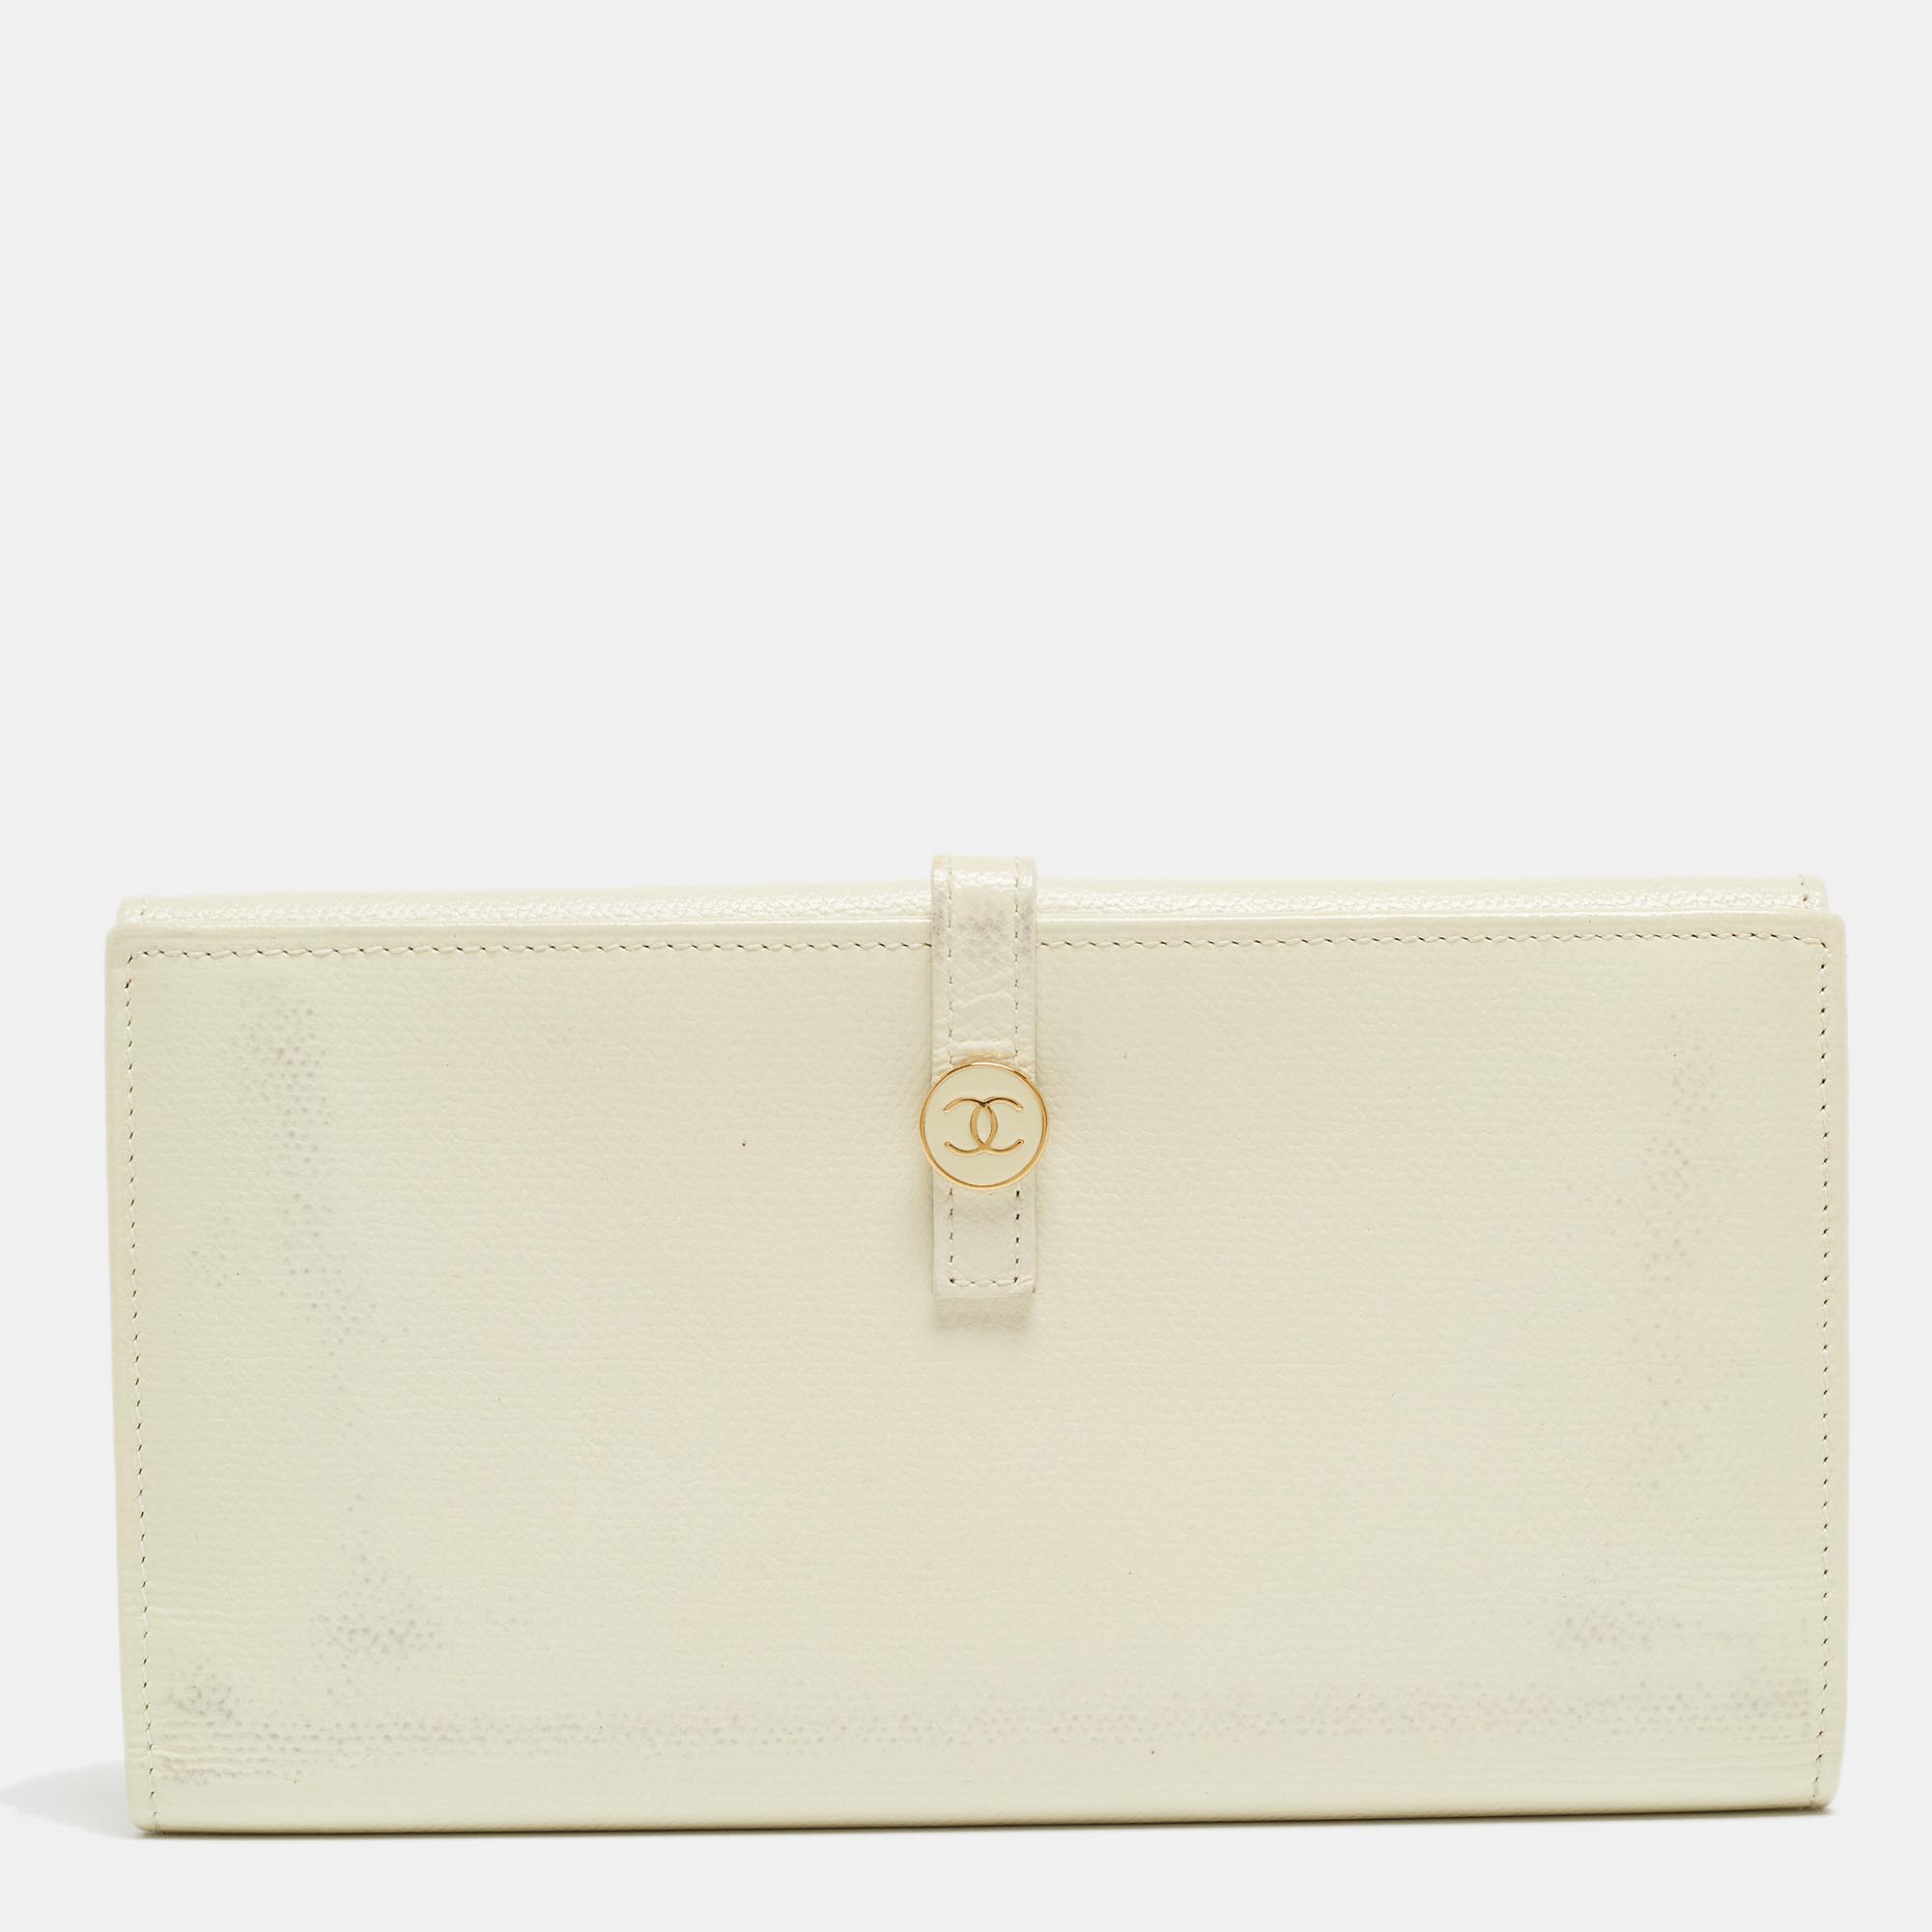 Chanel white leather cc flap french continental wallet